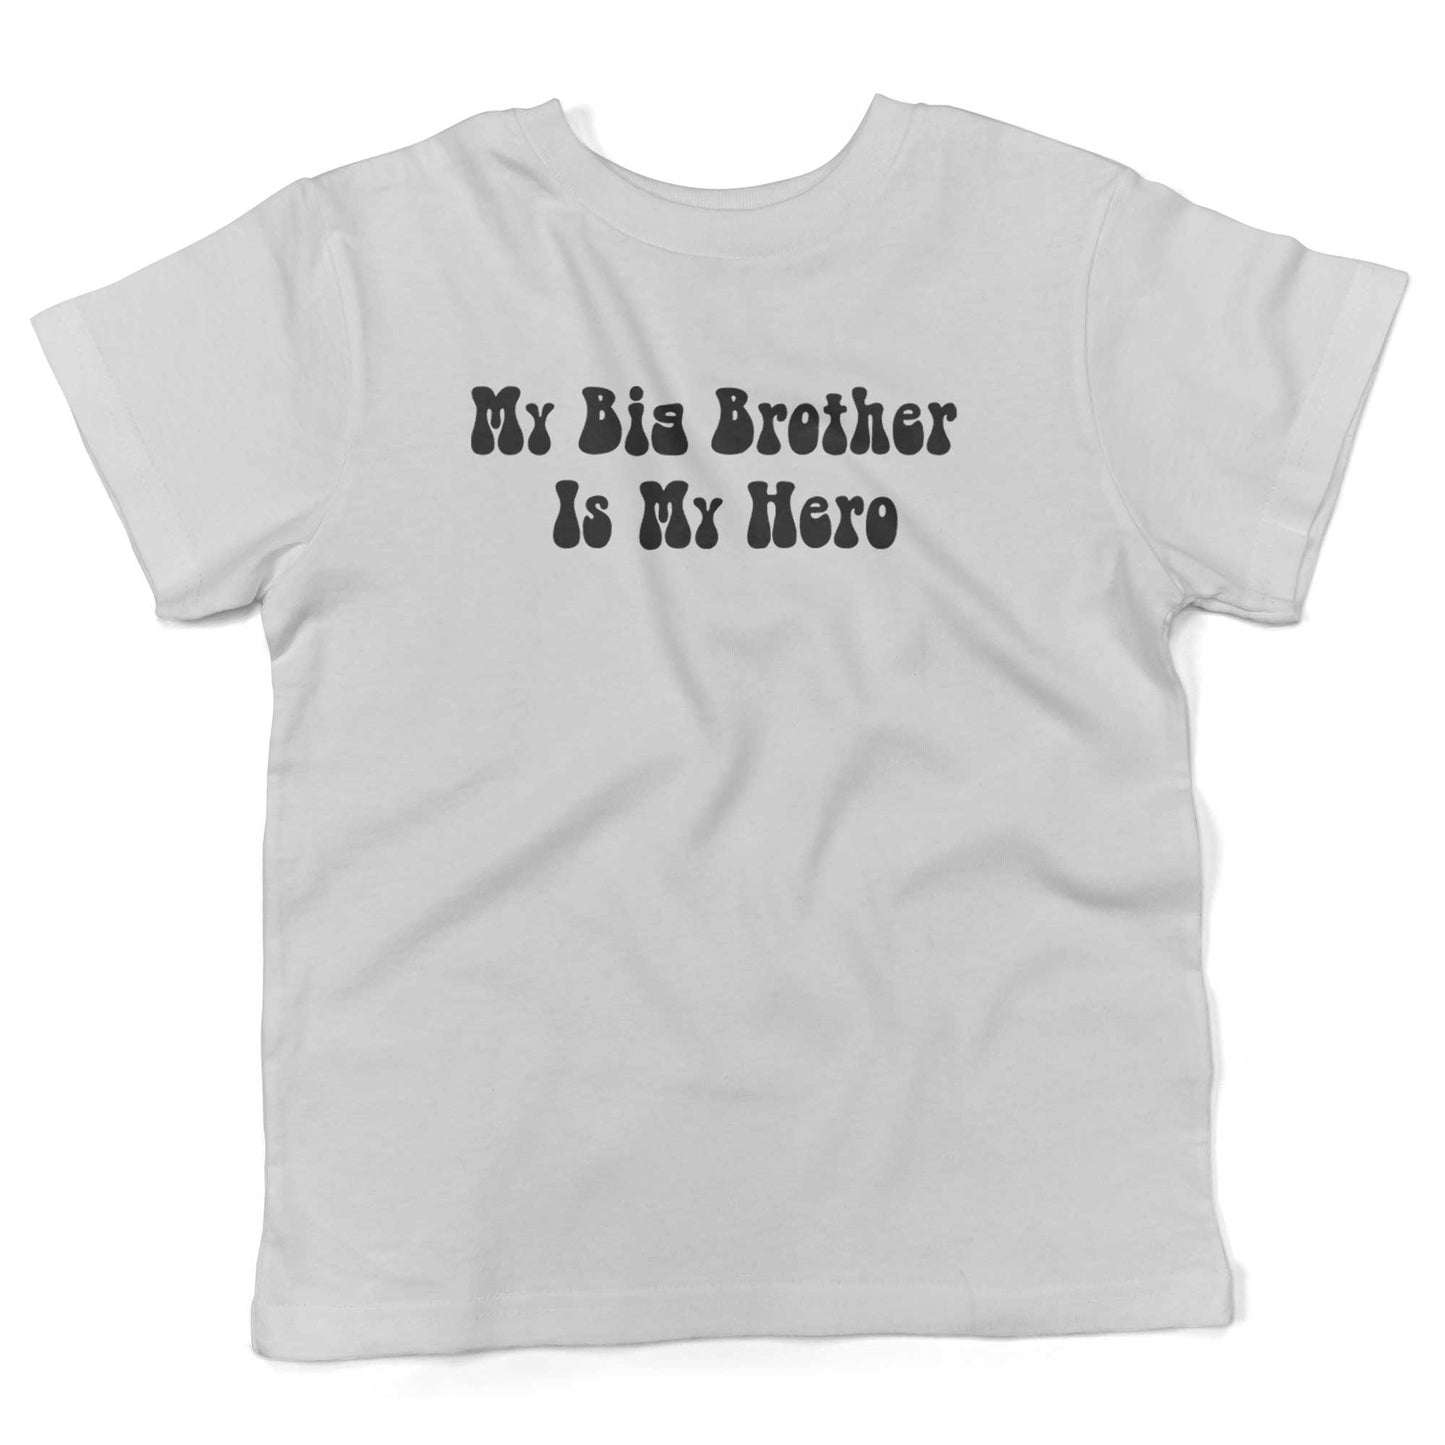 My Big Brother Is My Hero Toddler Shirt-White-2T